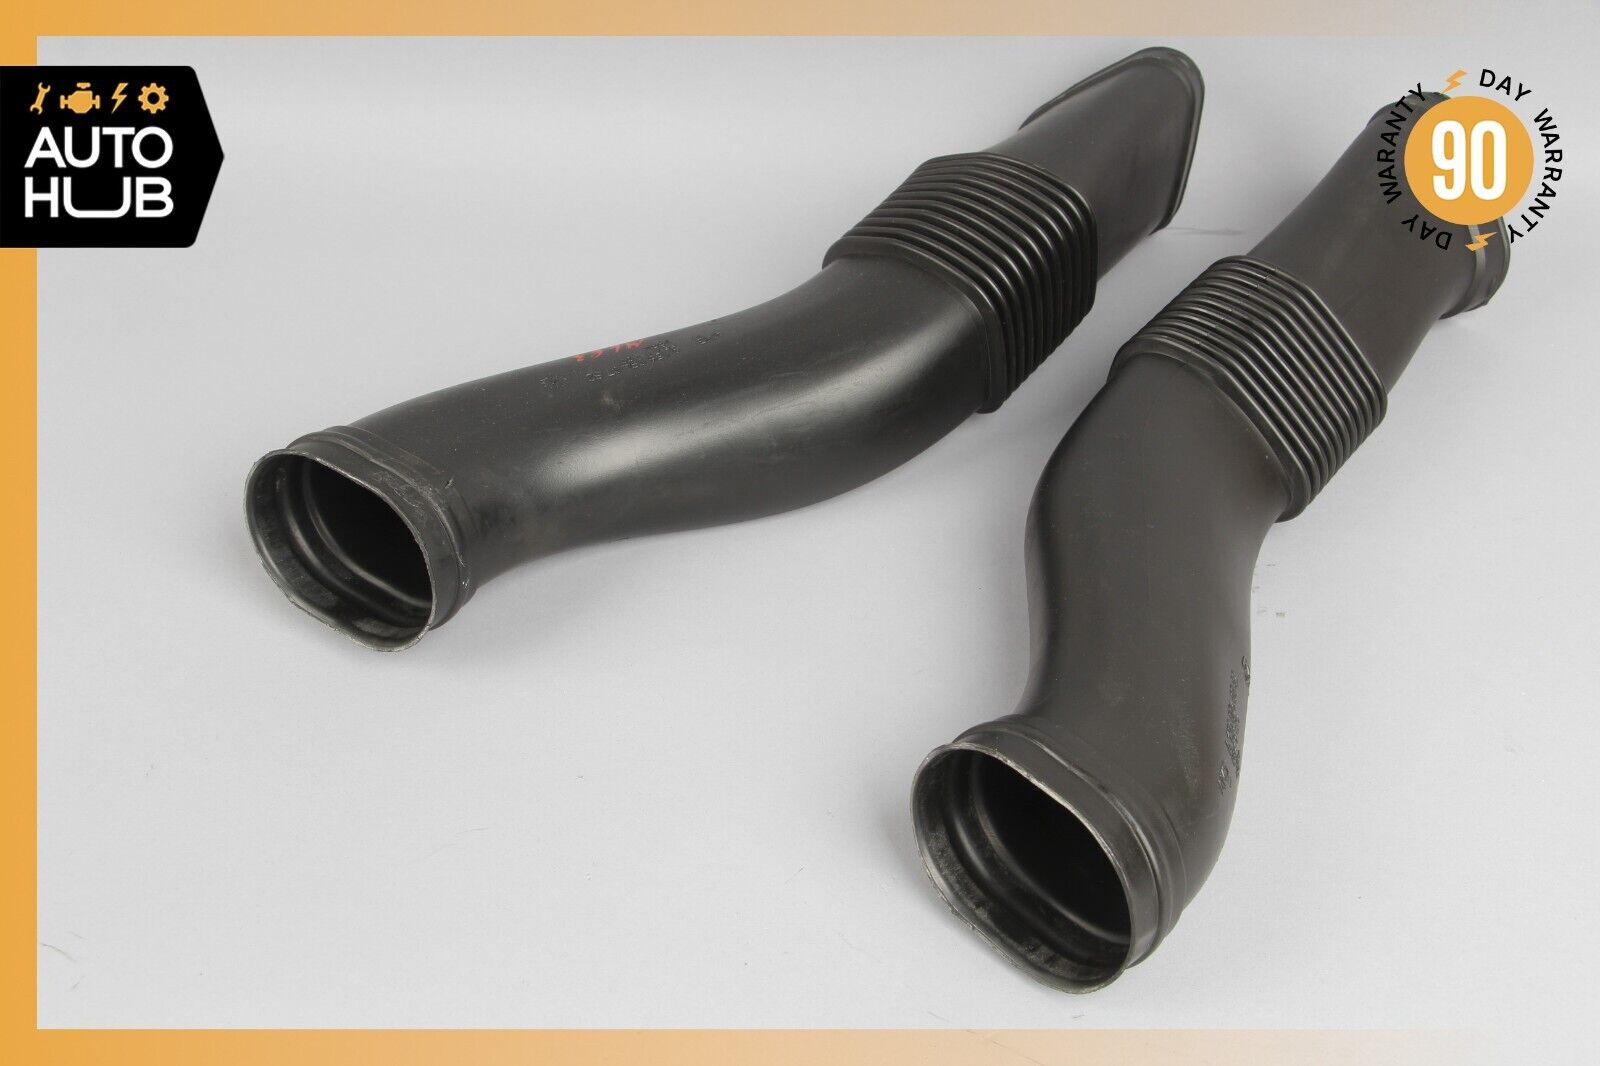 07-11 Mercedes W164 ML63 AMG Air Intake Duct Pipe Hose Left & Right Set of 2 OEM